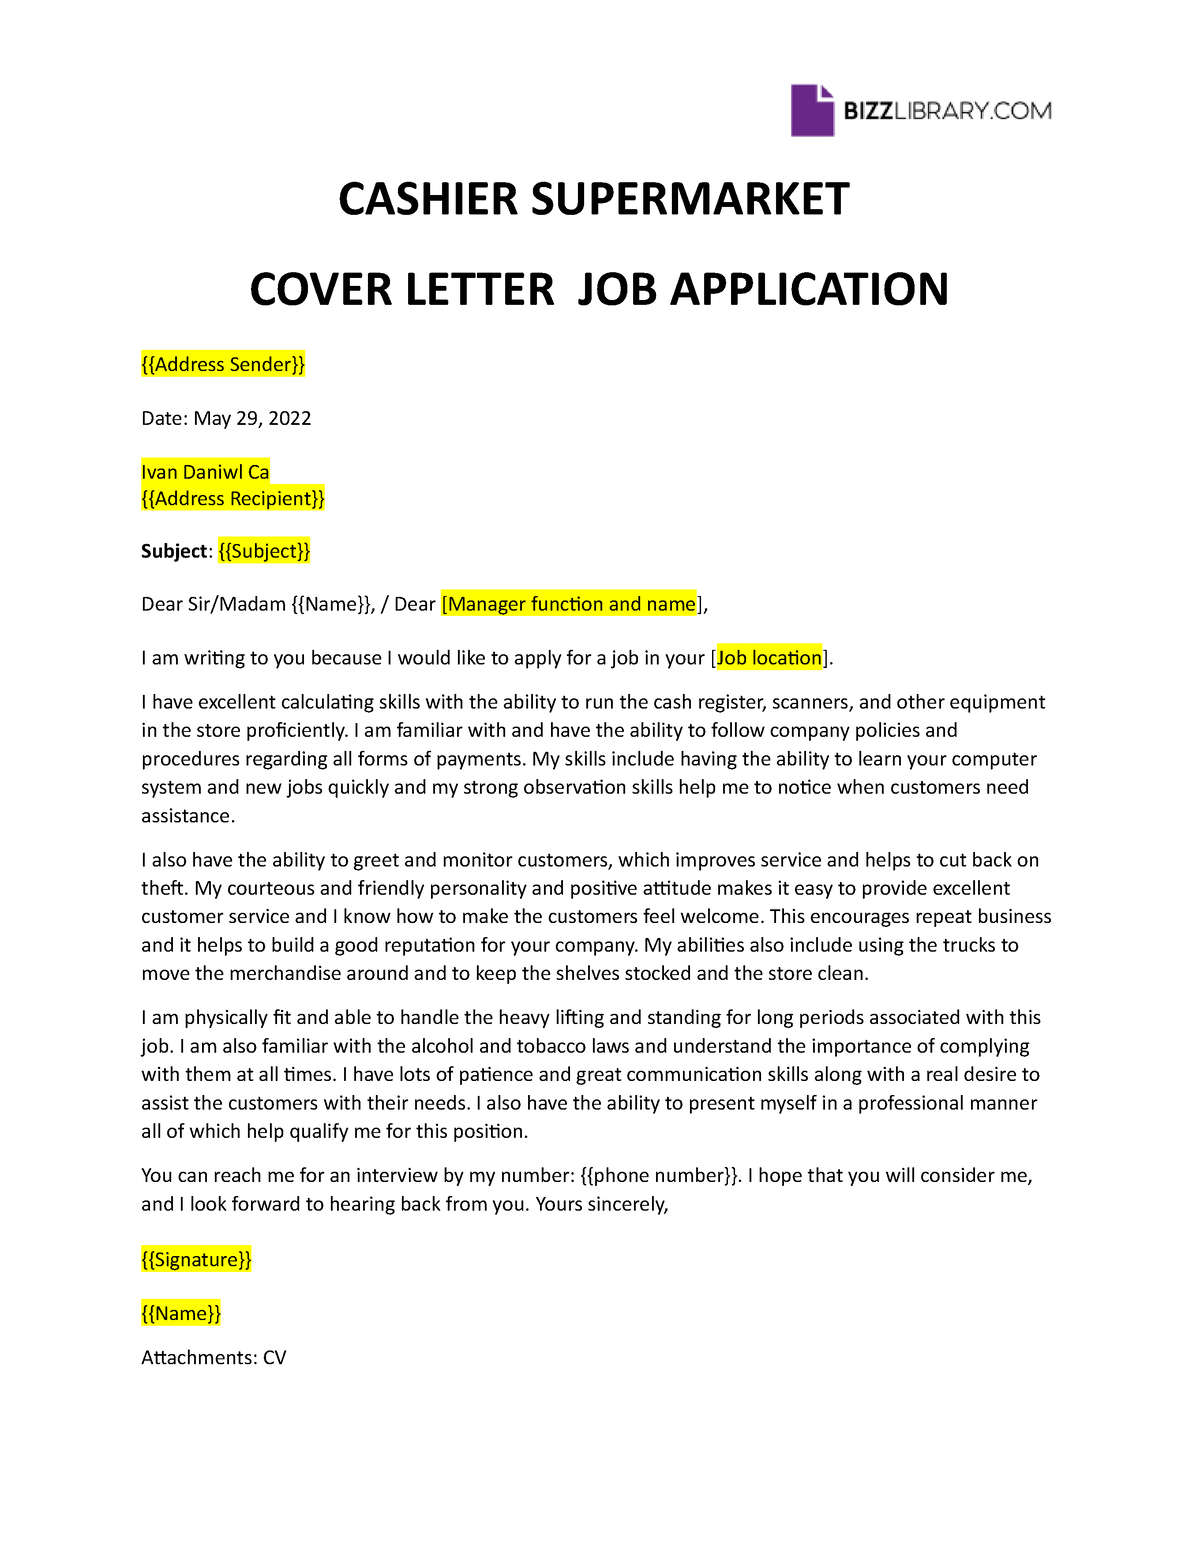 application letter for a job at a supermarket